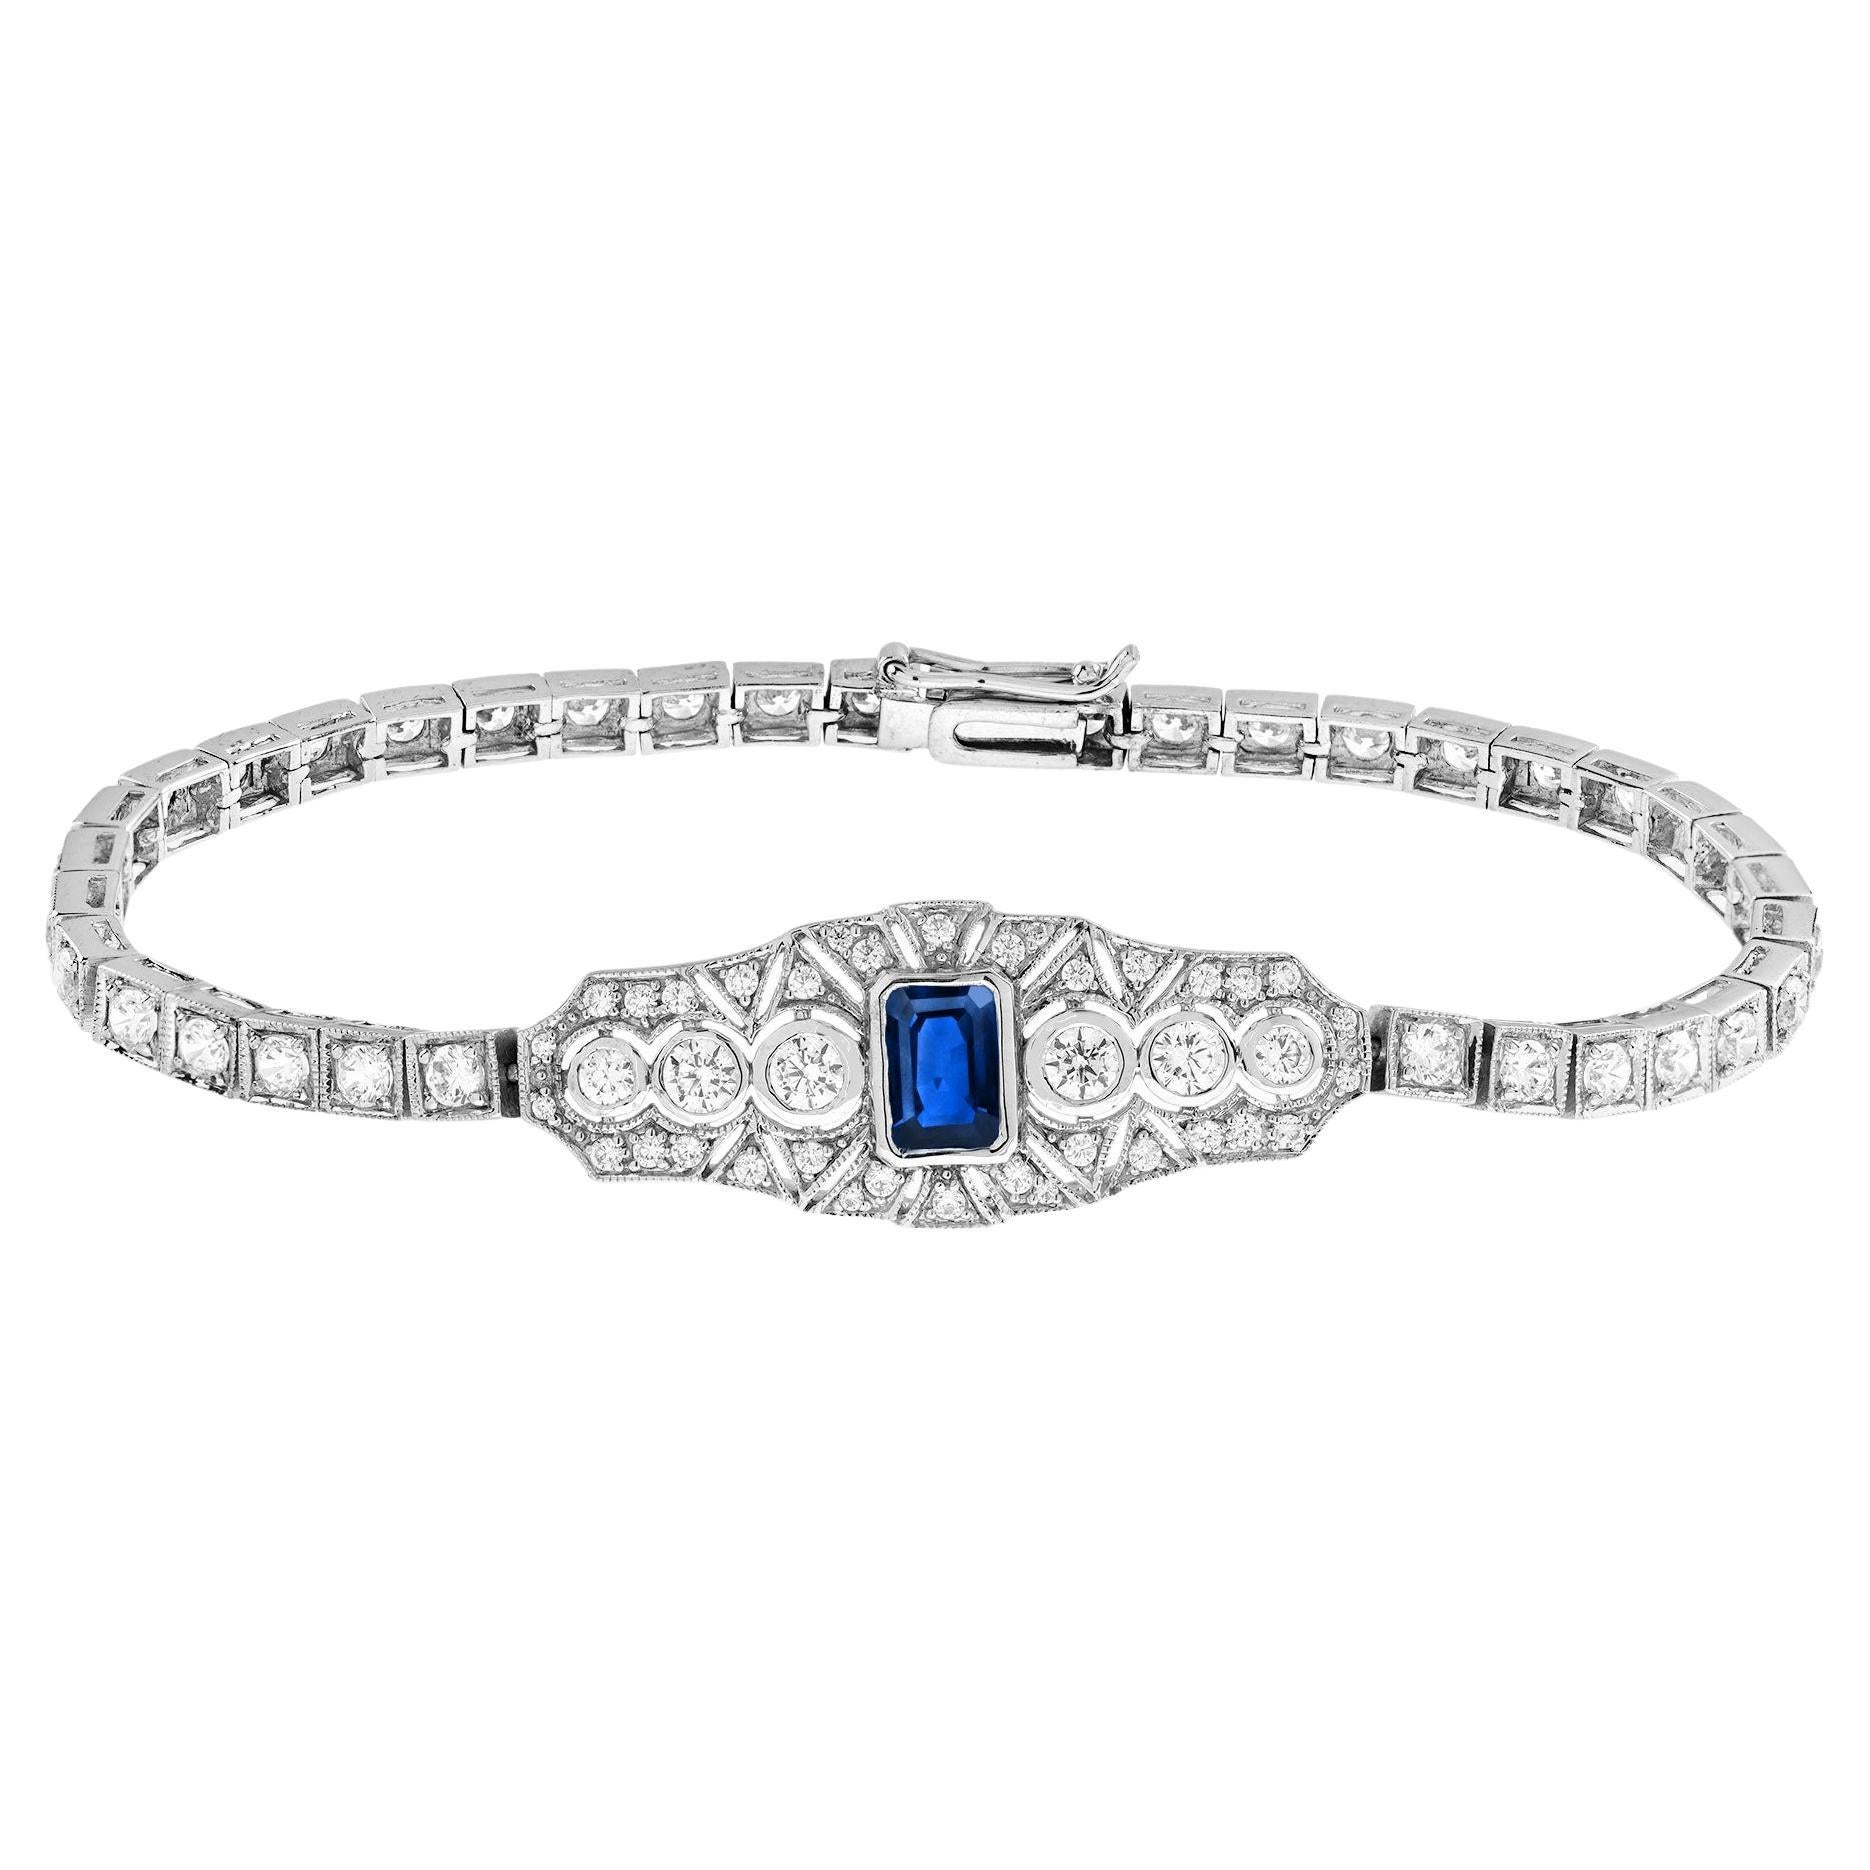 Blue Sapphire and Diamond Art Deco Style Bracelet in 18K White Gold For Sale